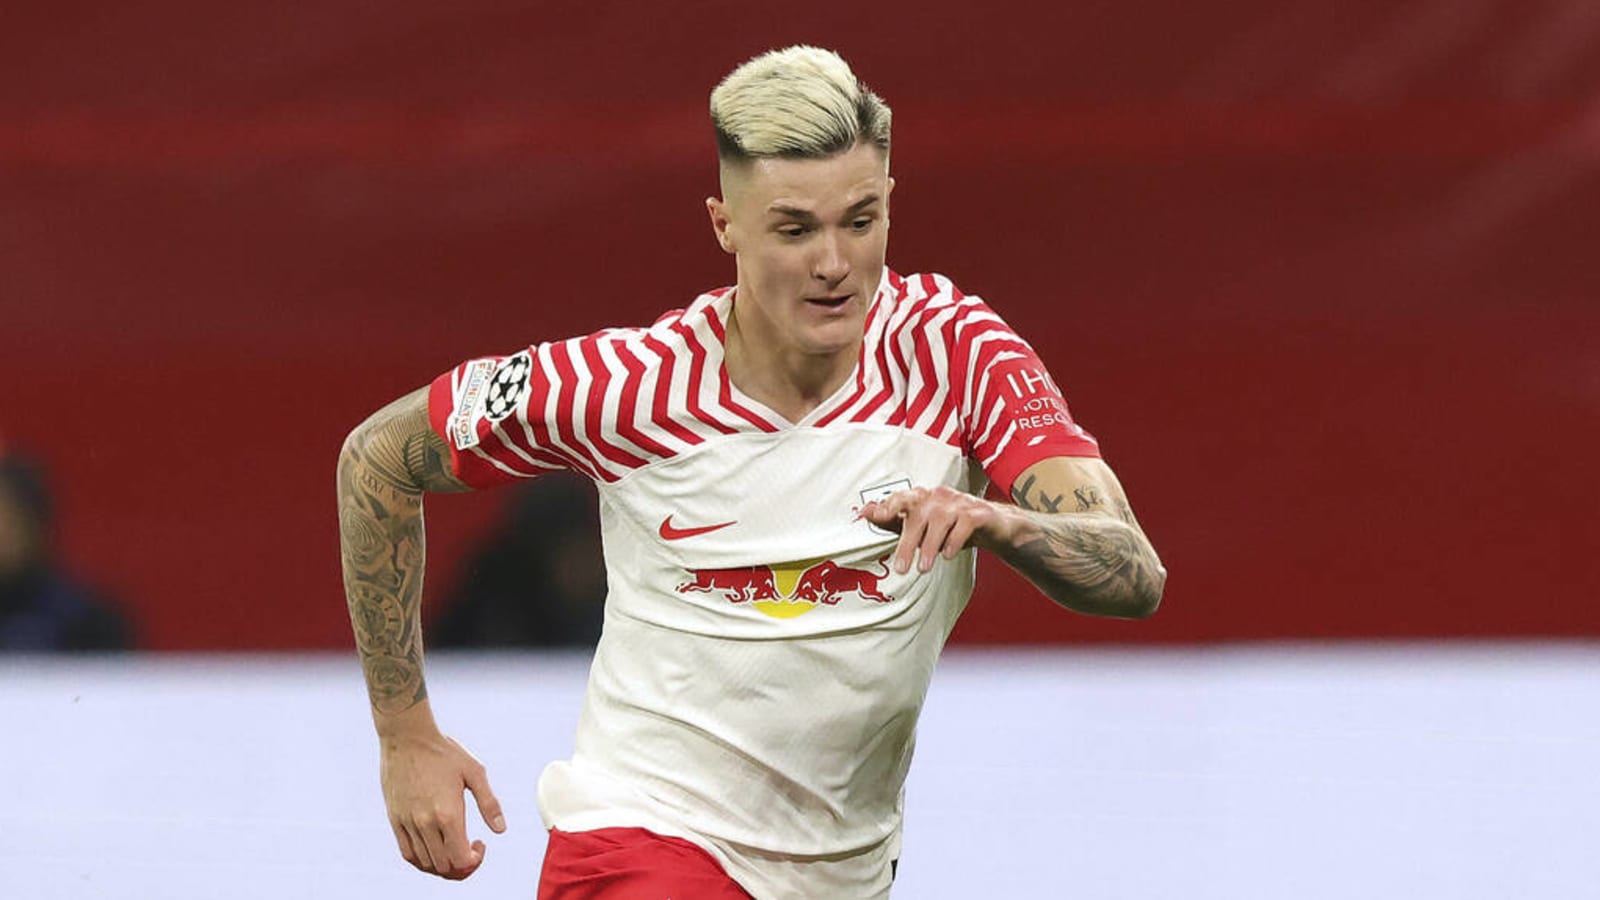 Arsenal is keen on signing RB Leipzig star in the summer